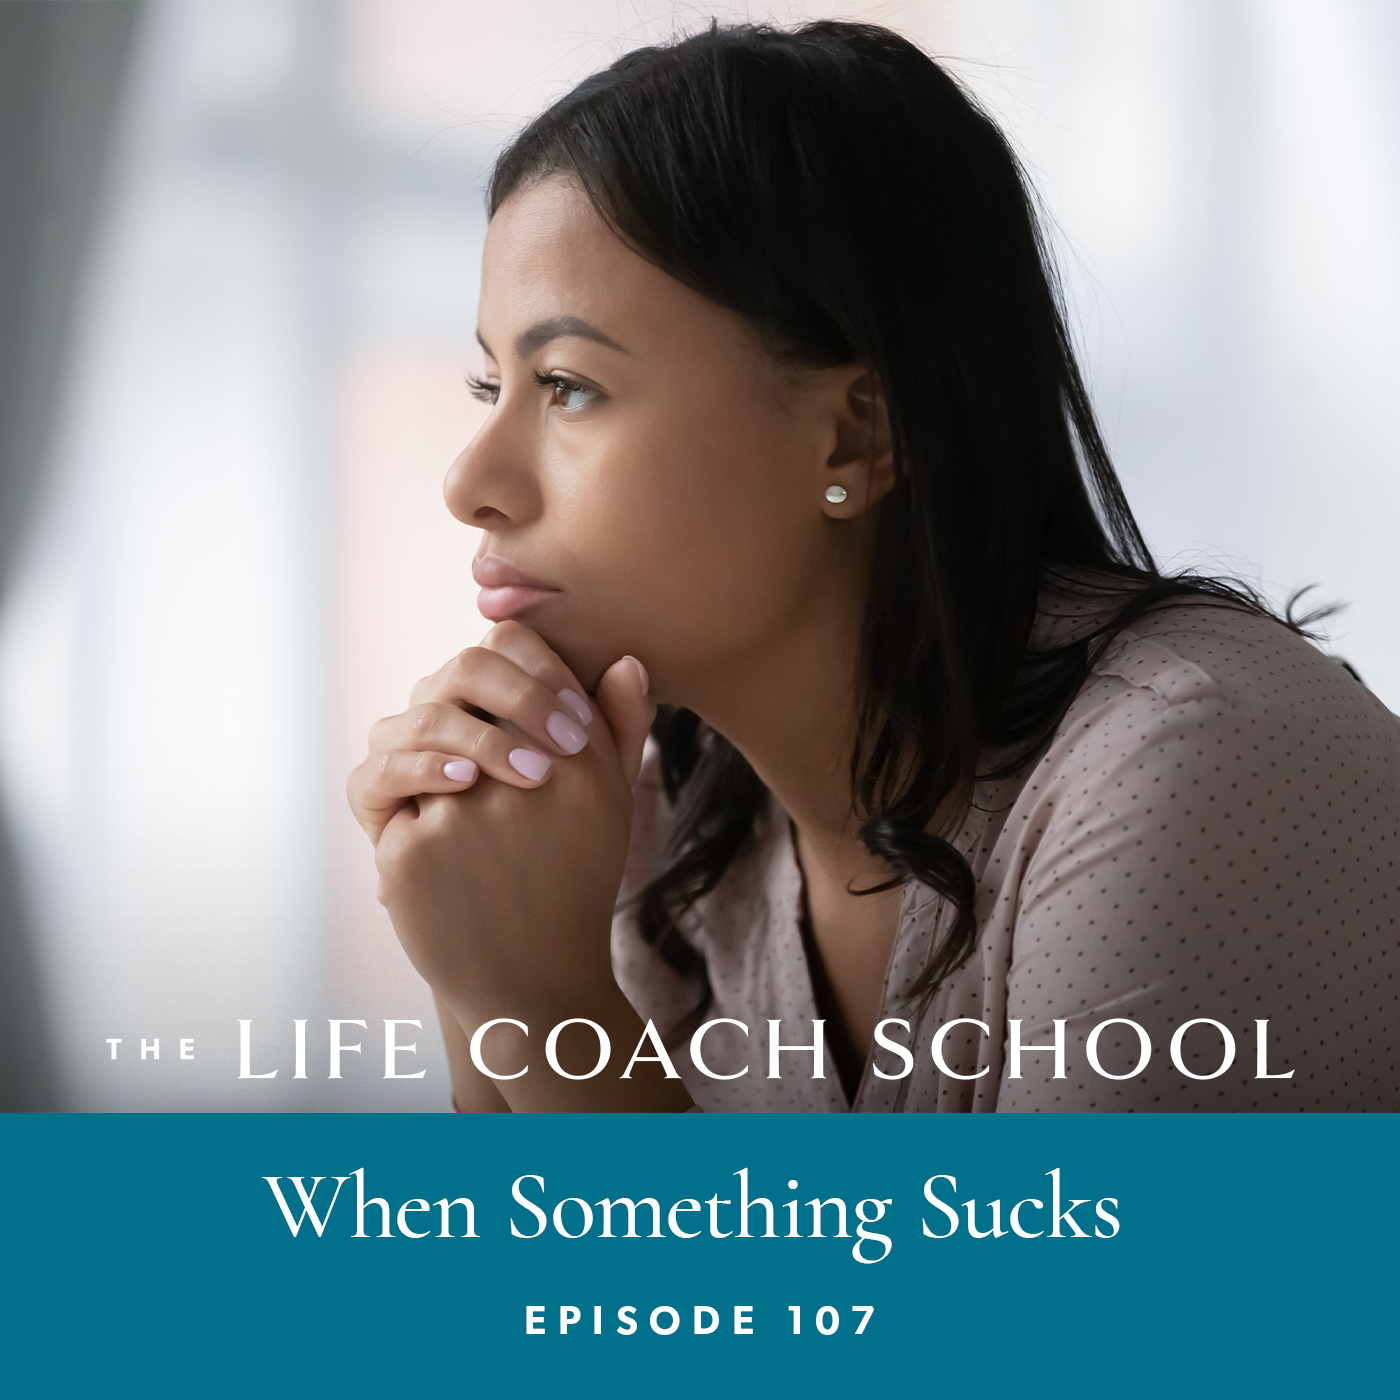 The Life Coach School Podcast with Brooke Castillo | Episode 107 | When Something Sucks